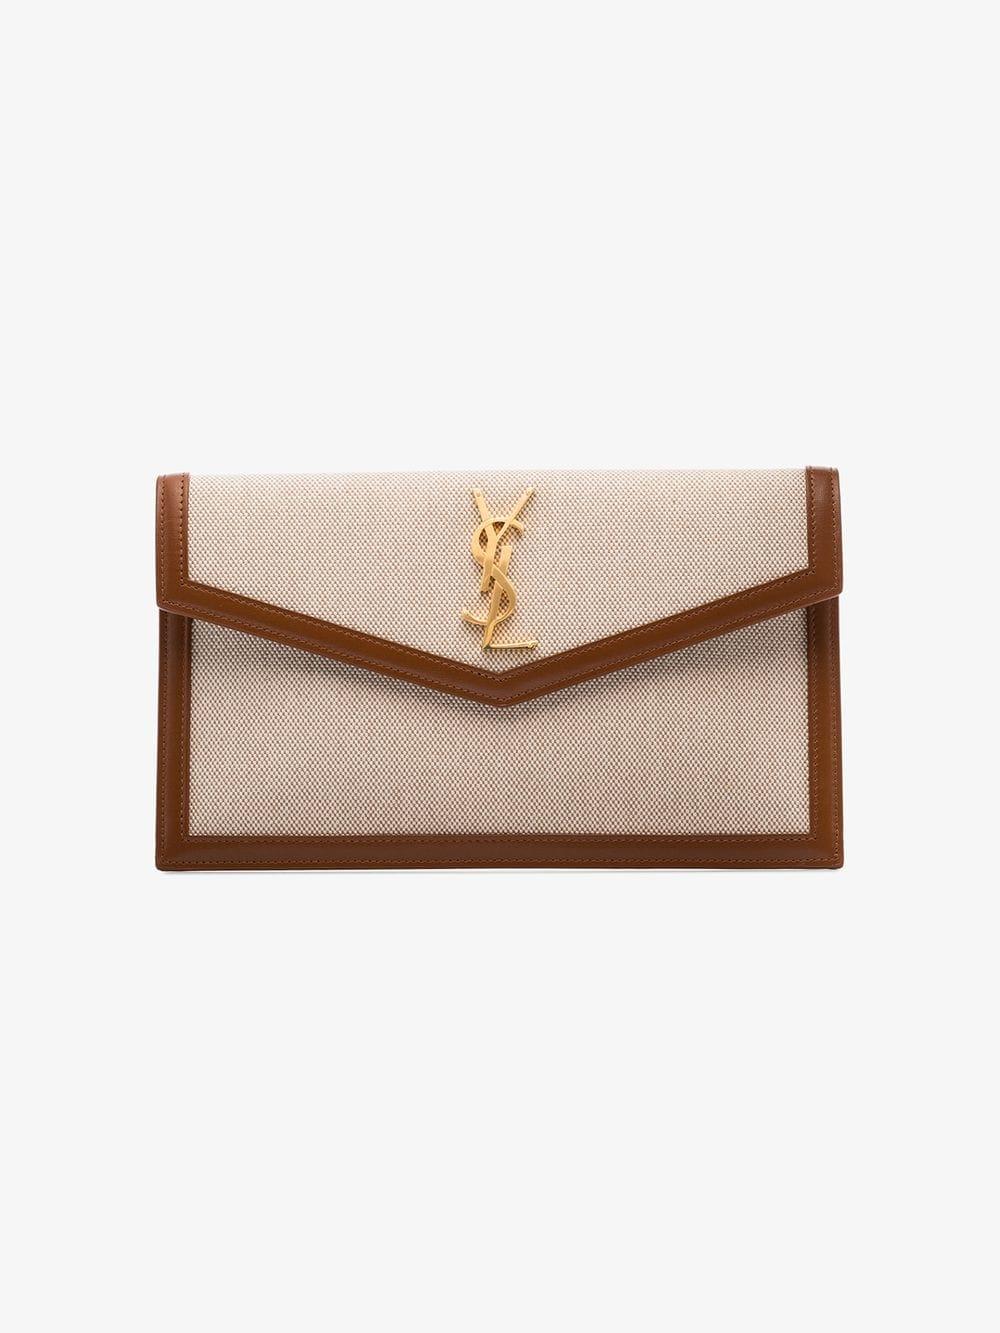 Saint Laurent Uptown Small Leather Clutch